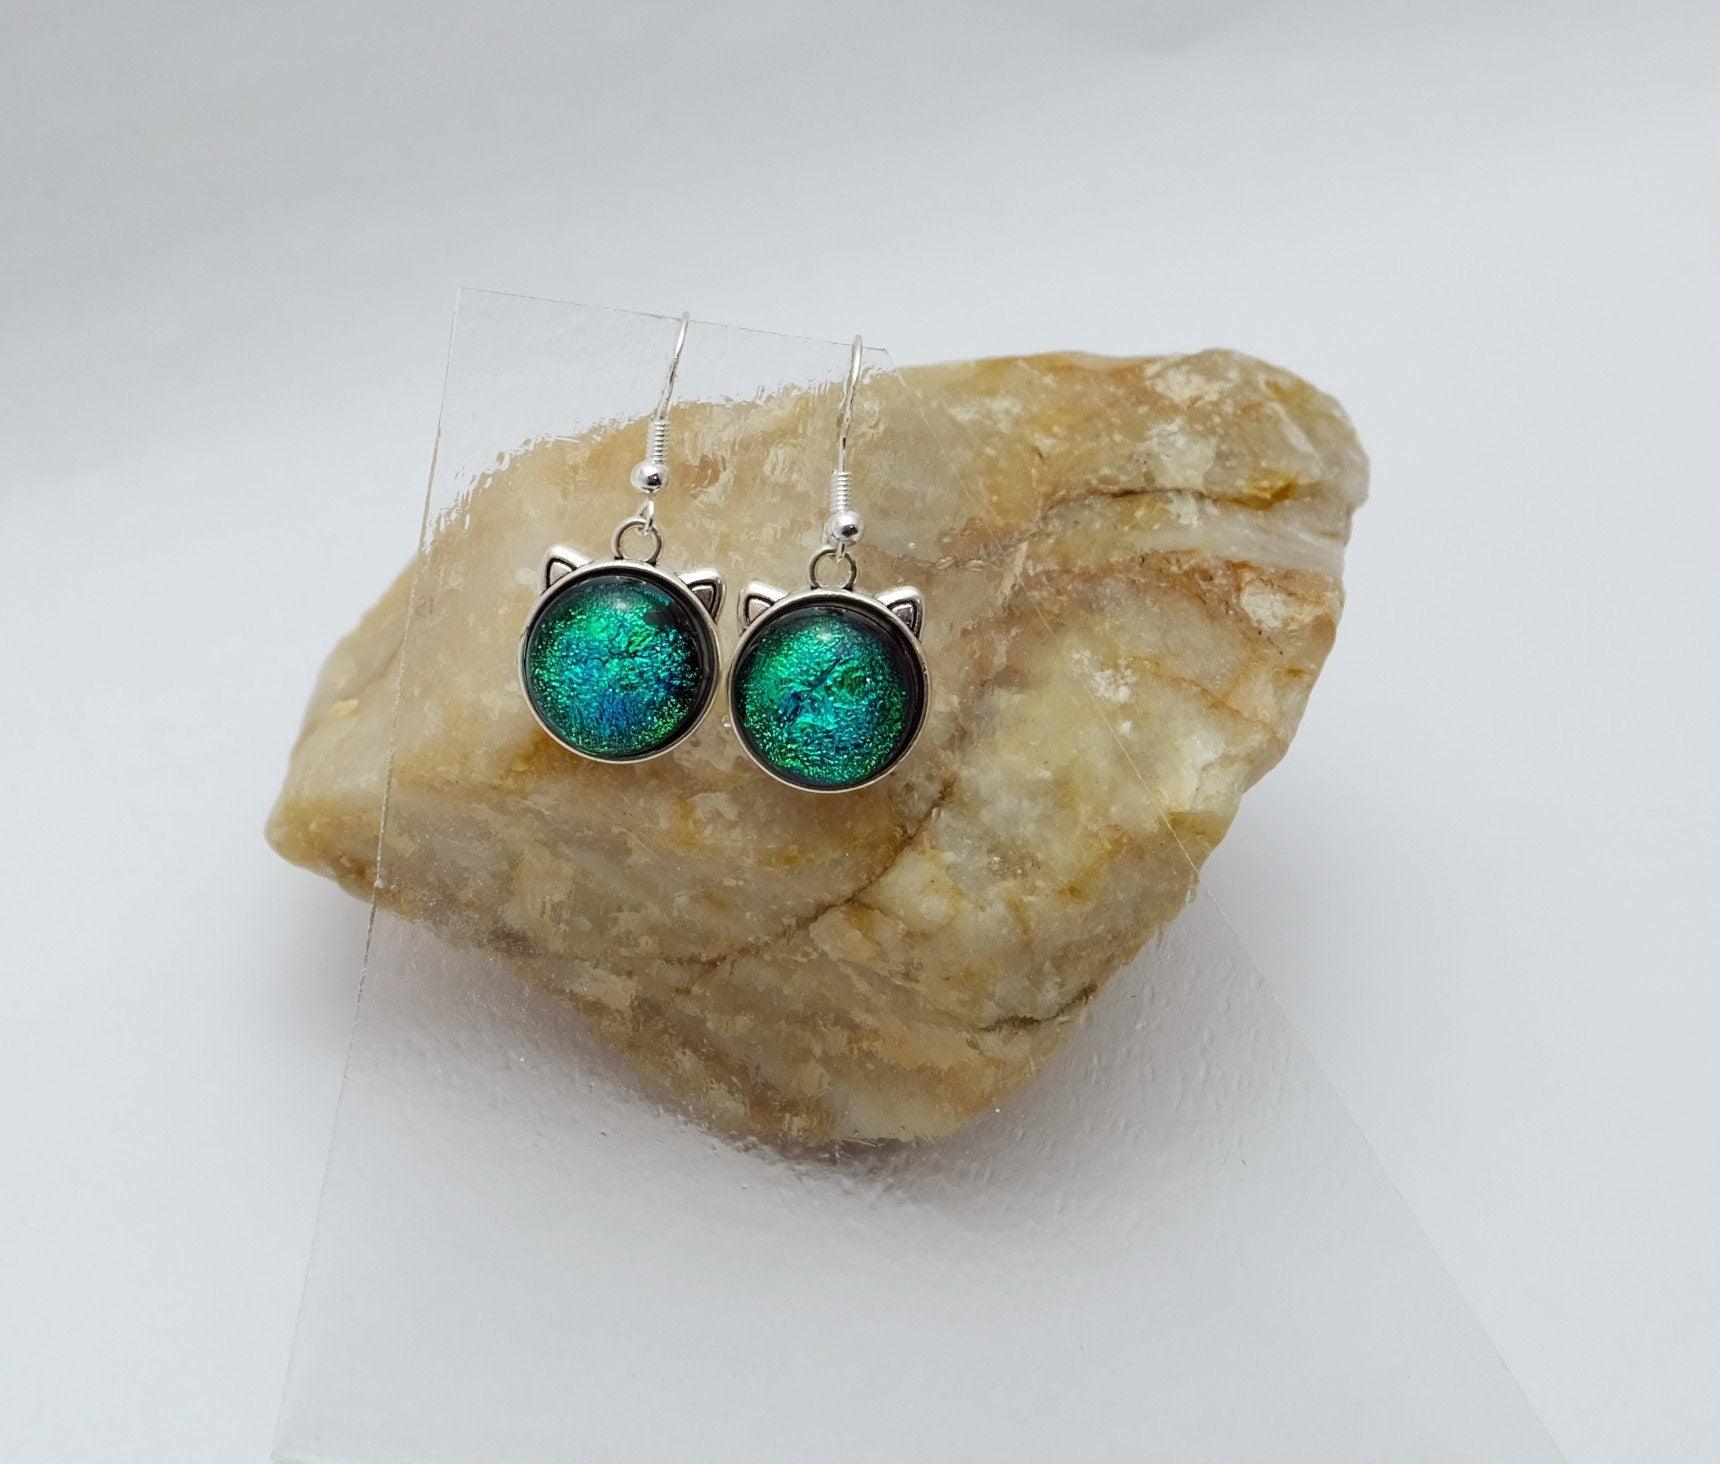 Whimsical Cat Head Shaped pierced Earrings - silver Tone with Green Dichroic Glass seedsglassworks seeds glassworks